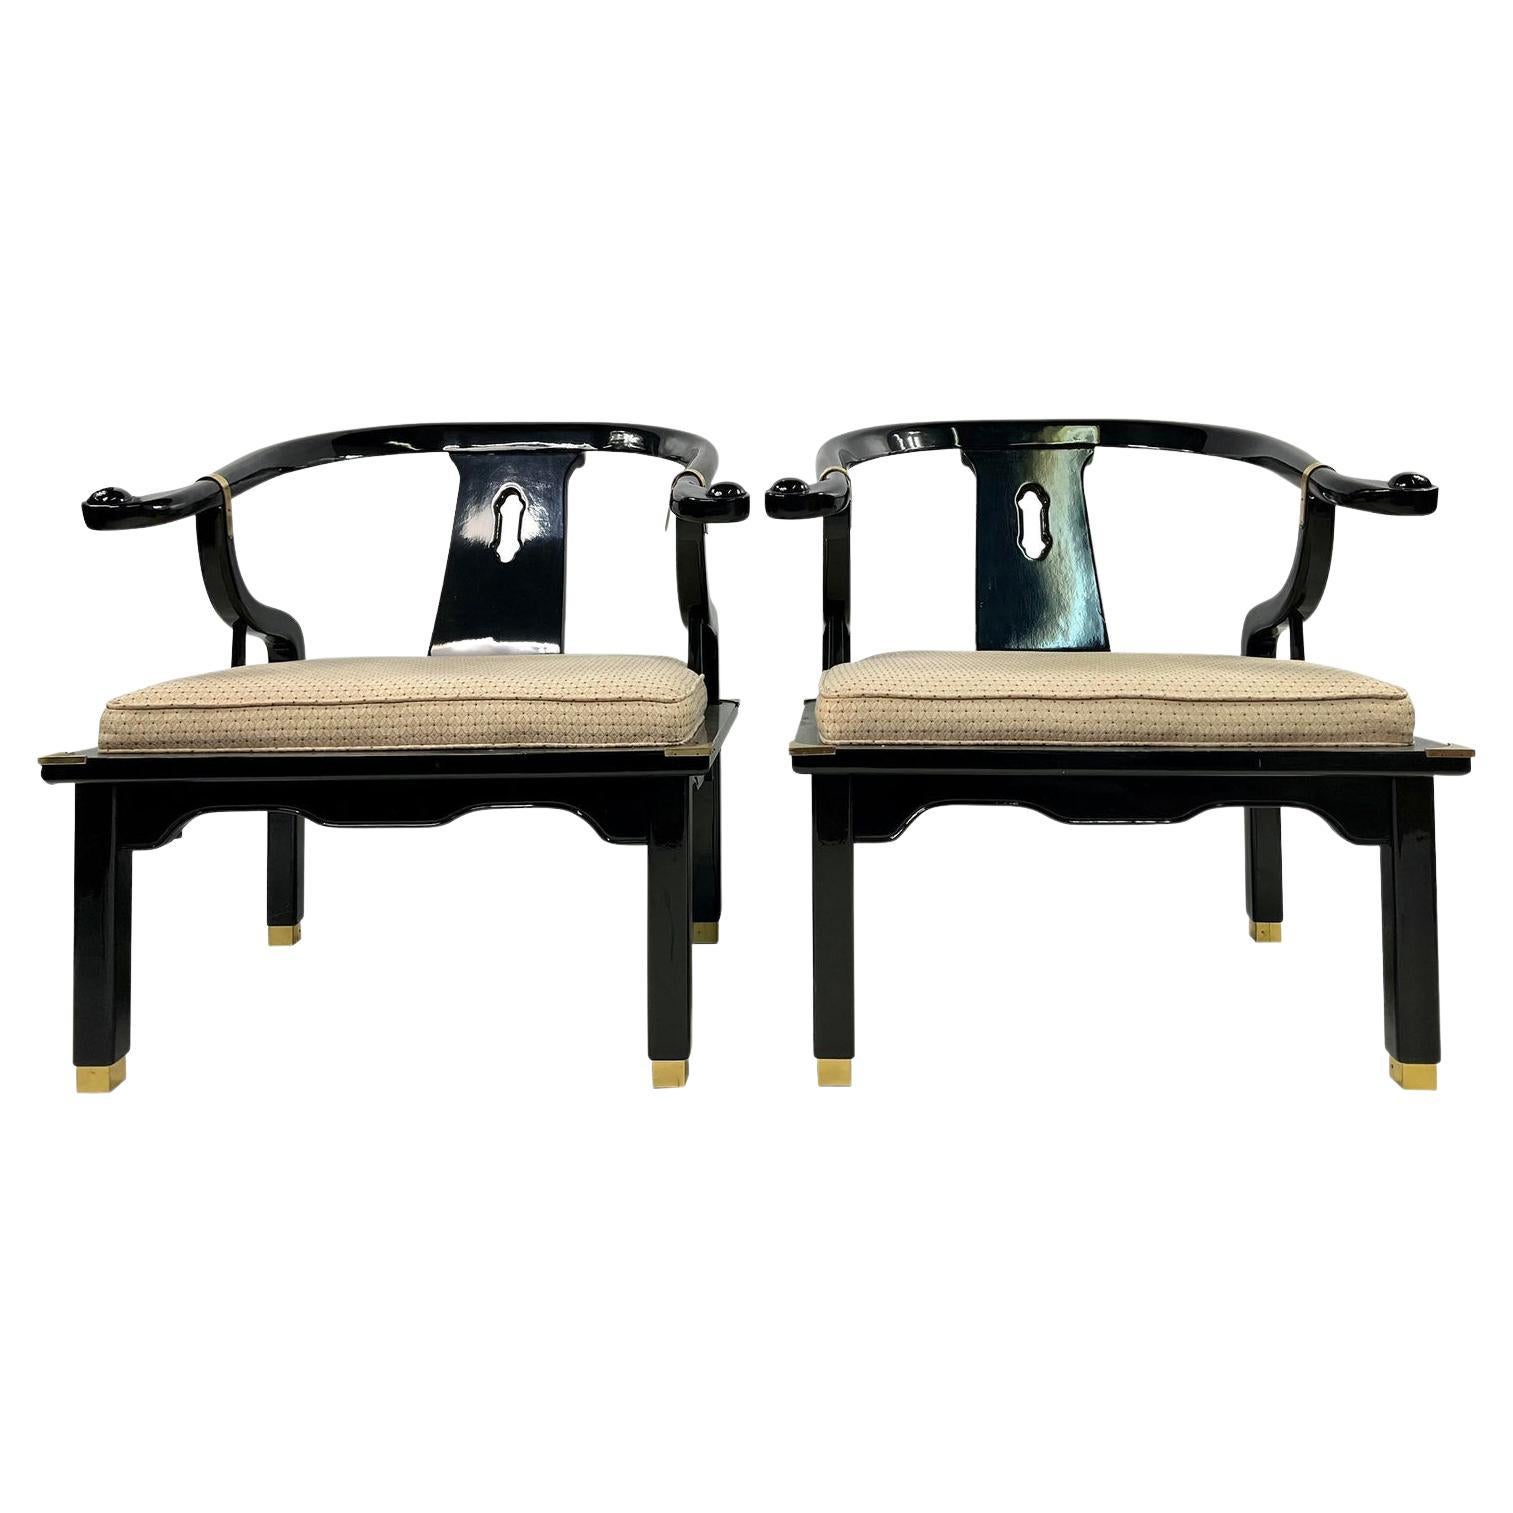 1960s James Mont Style Black Lacquer Asian Modern Chinoiserie Ming Chairs